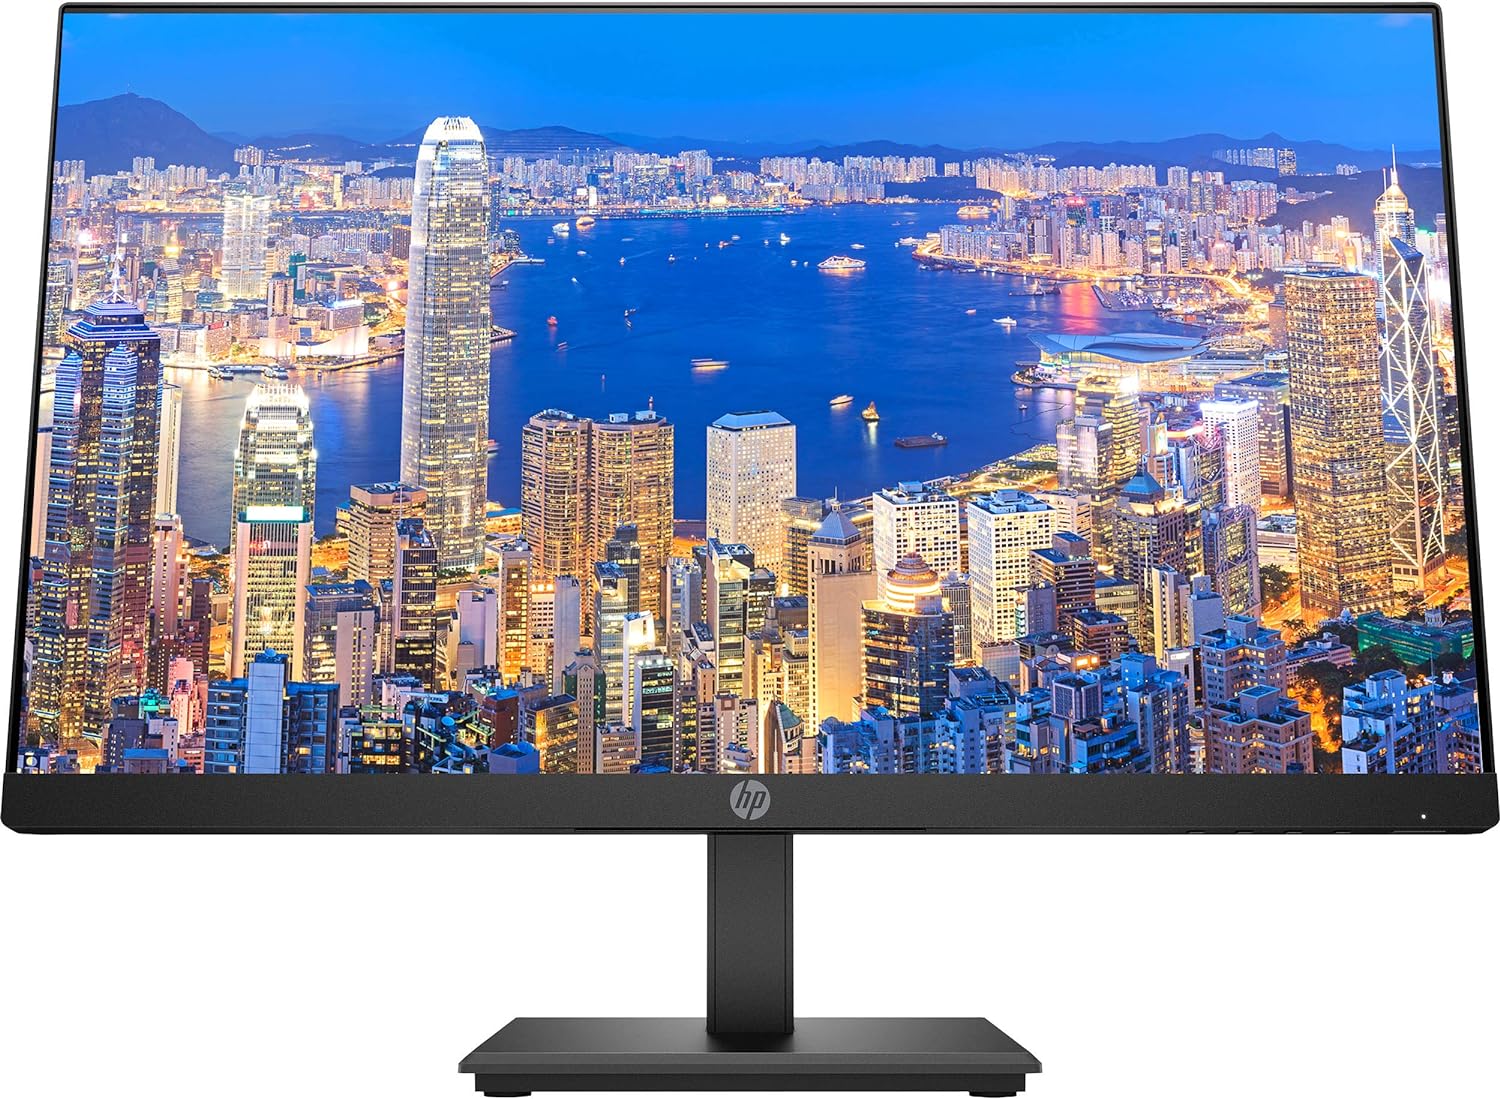 HP P224 21.5 Inch FHD LED-Backlit LCD IPS Anti-Glare Monitor (HDMI, VGA, DisplayPort) 2-Pack Bundle with PW313 Full HD 1080p Live Streamer Webcam and Desk Mount Clamp Dual Monitor Stand